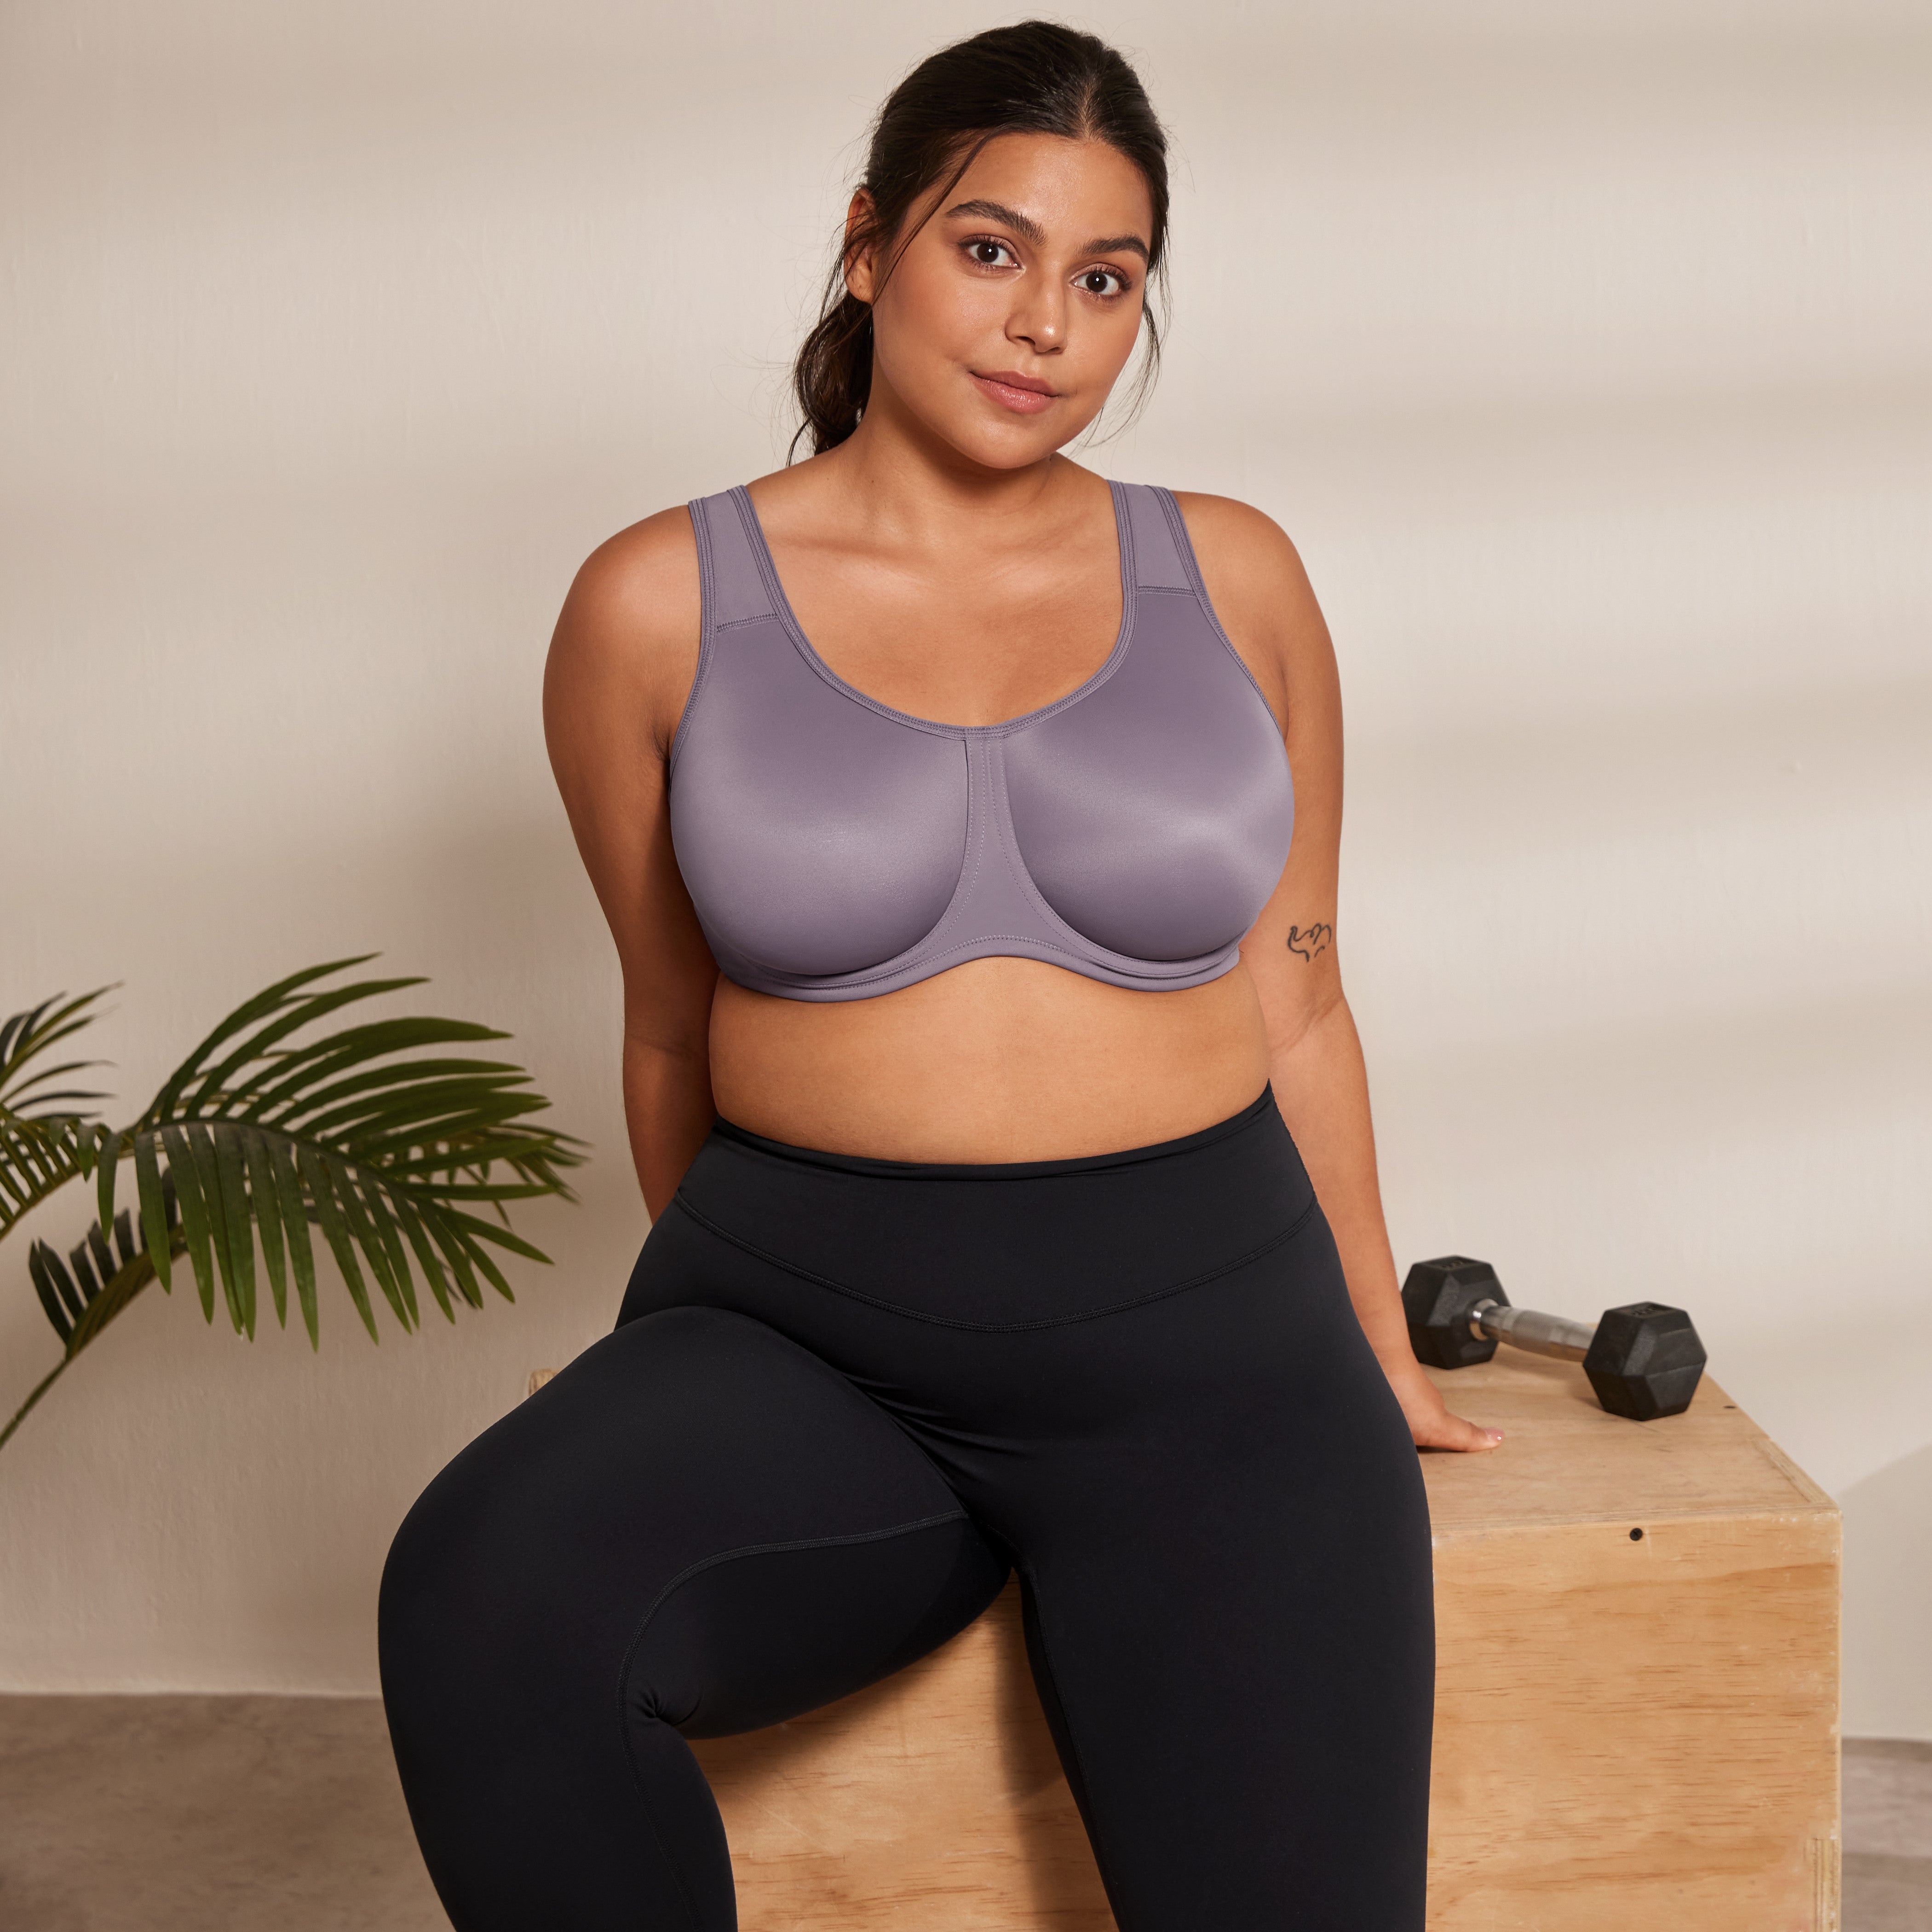 Essenther  Chic Bras & Clothing for Women – Delimira.us